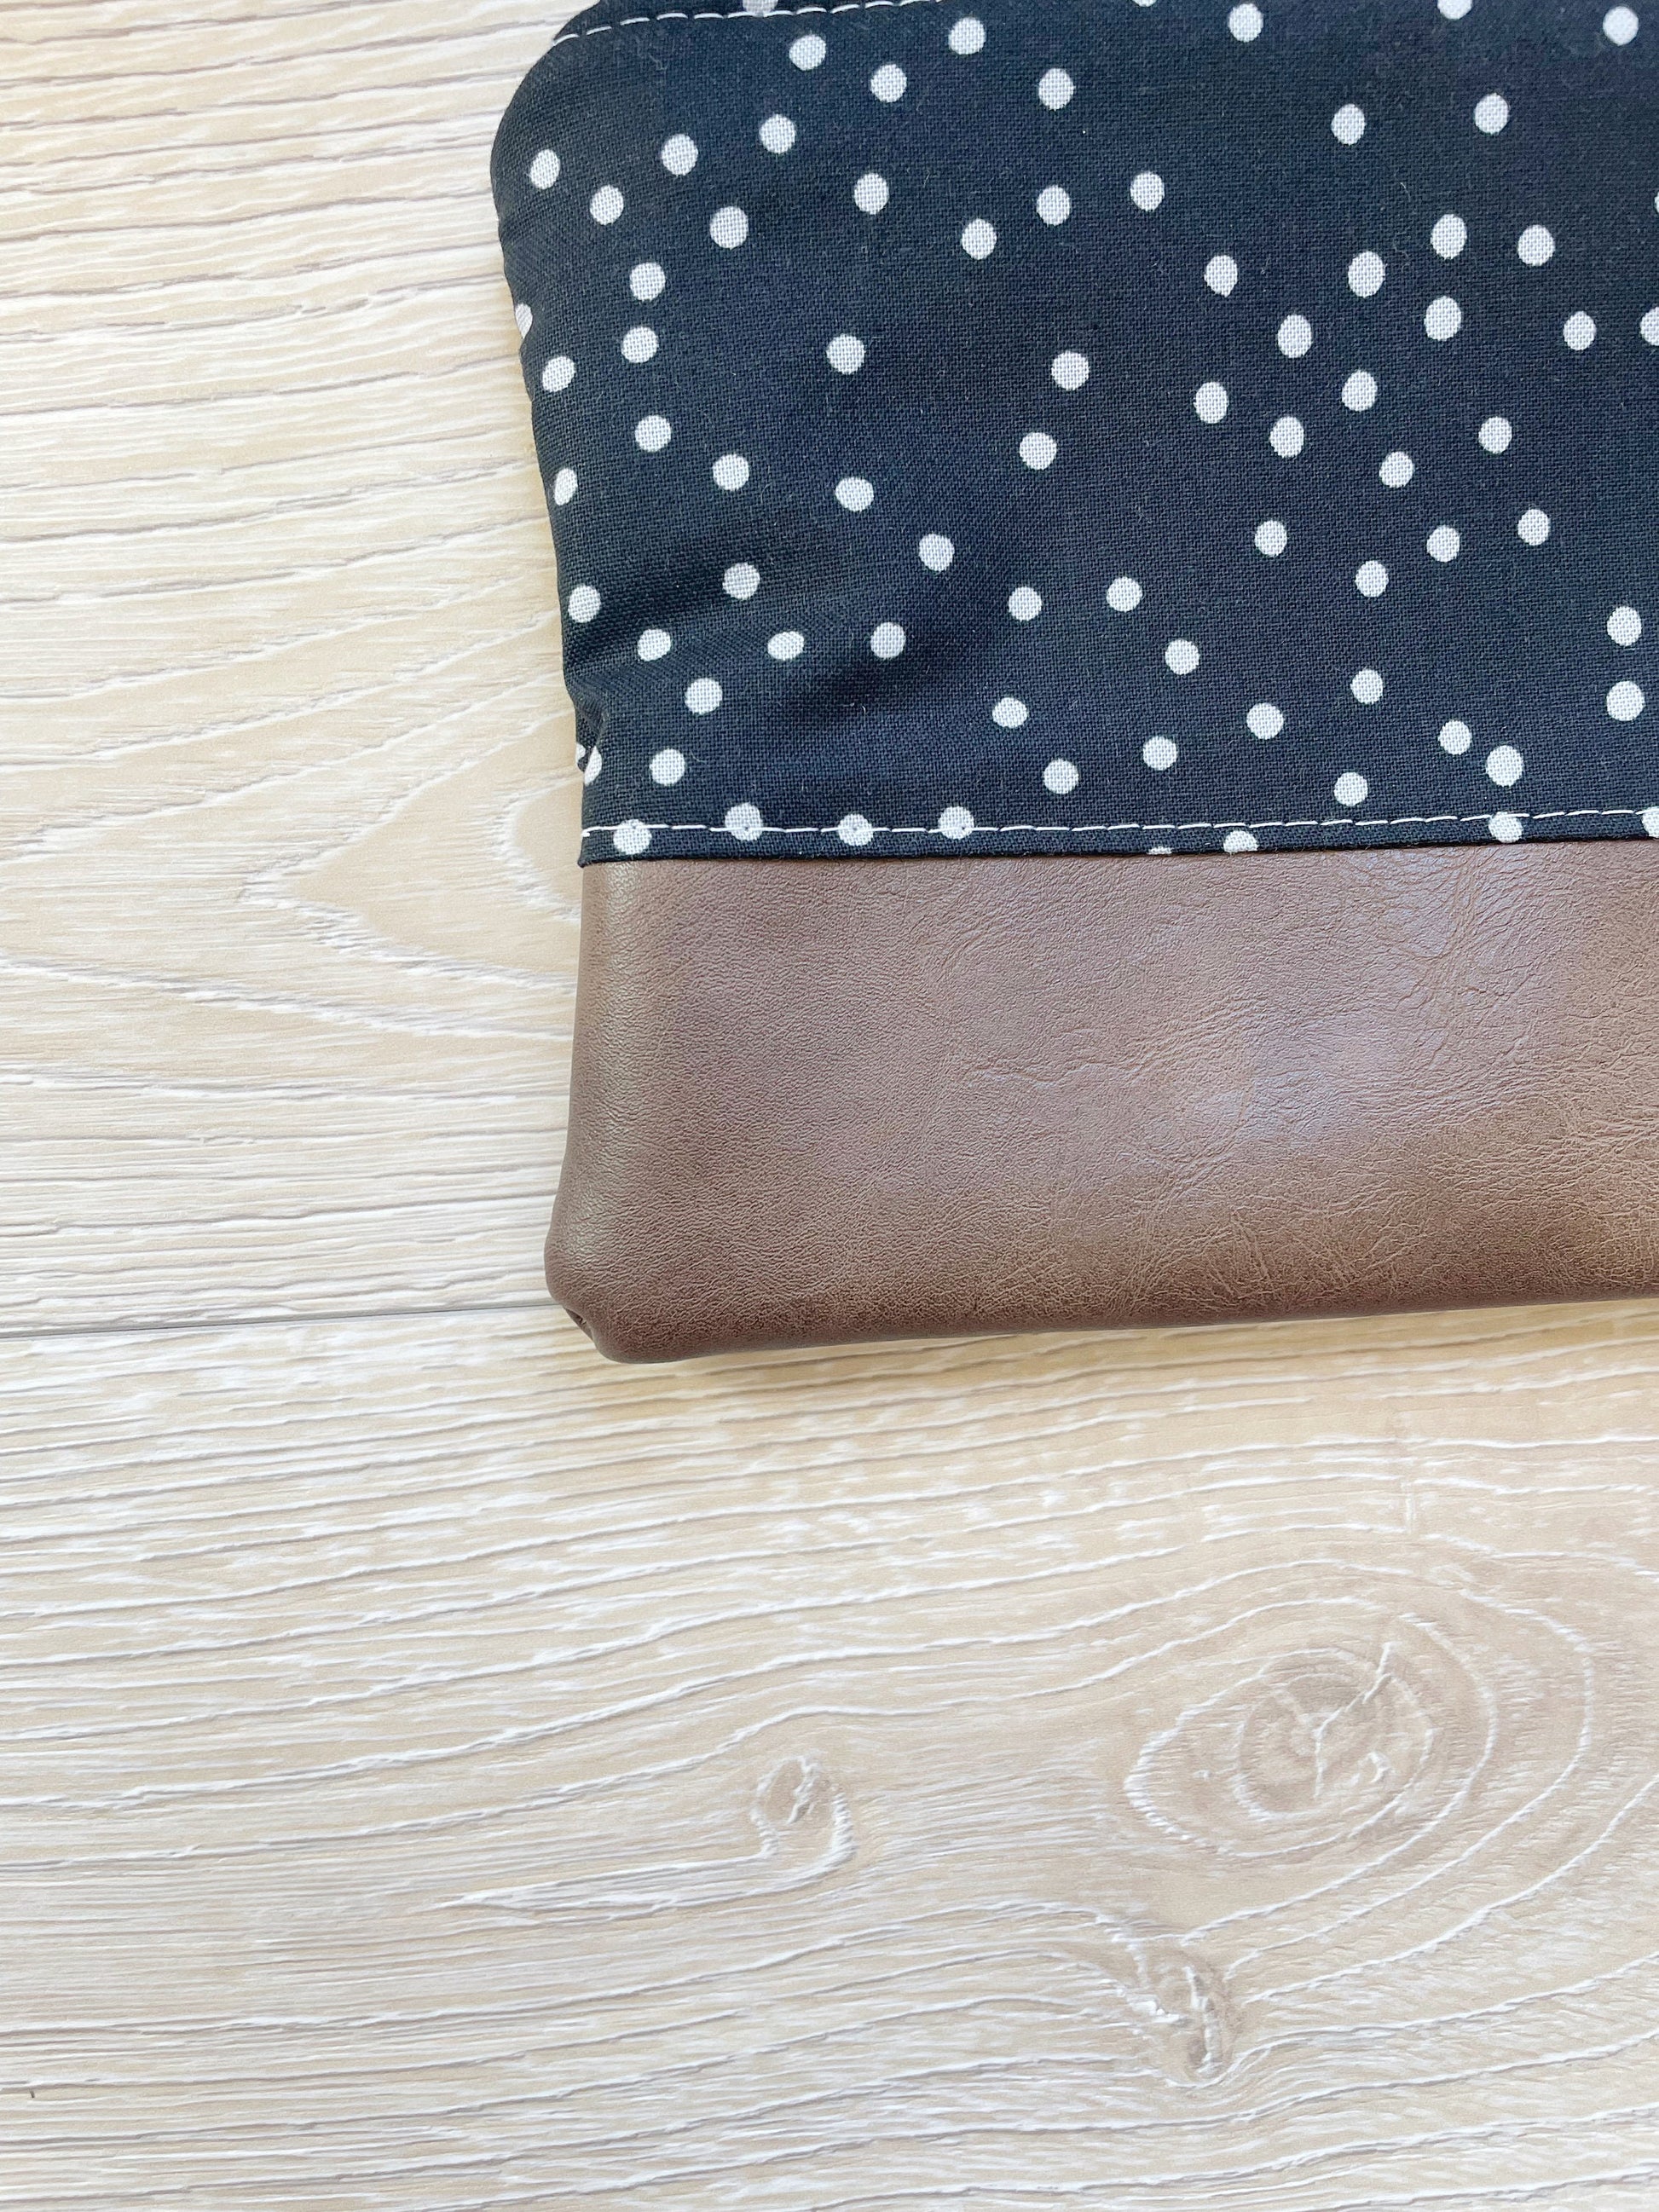 black and gray dot wristlet with silver zipper and brown vinyl along bottom of clutch. matching black and gray dot wrist strap